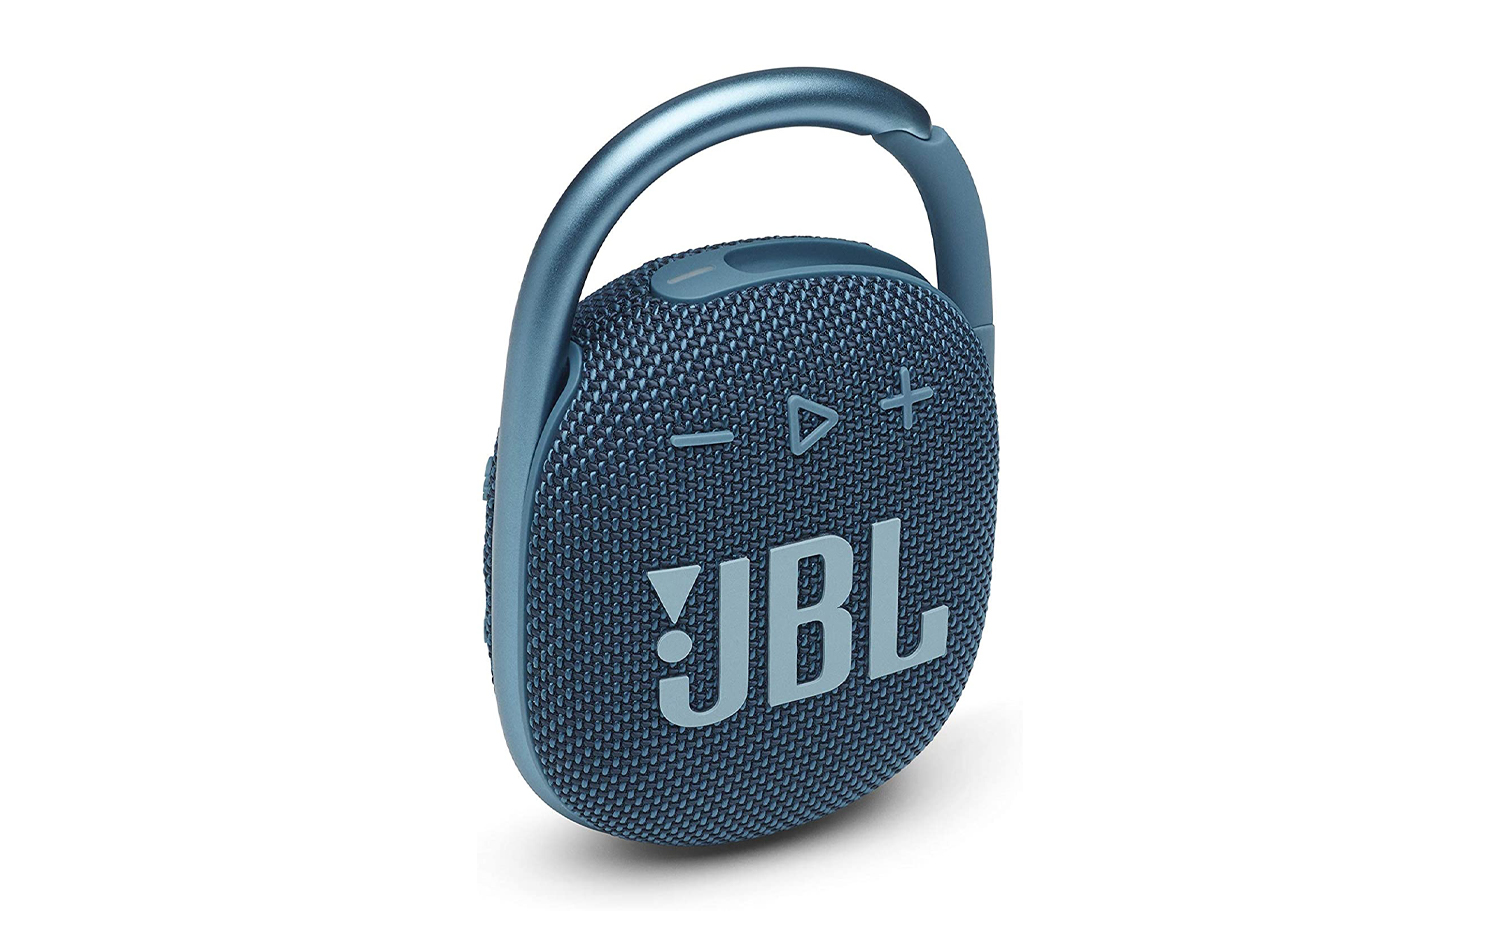 The portable speaker for students with a more active lifestyle, the JBL Clip 4 comes in different colors.